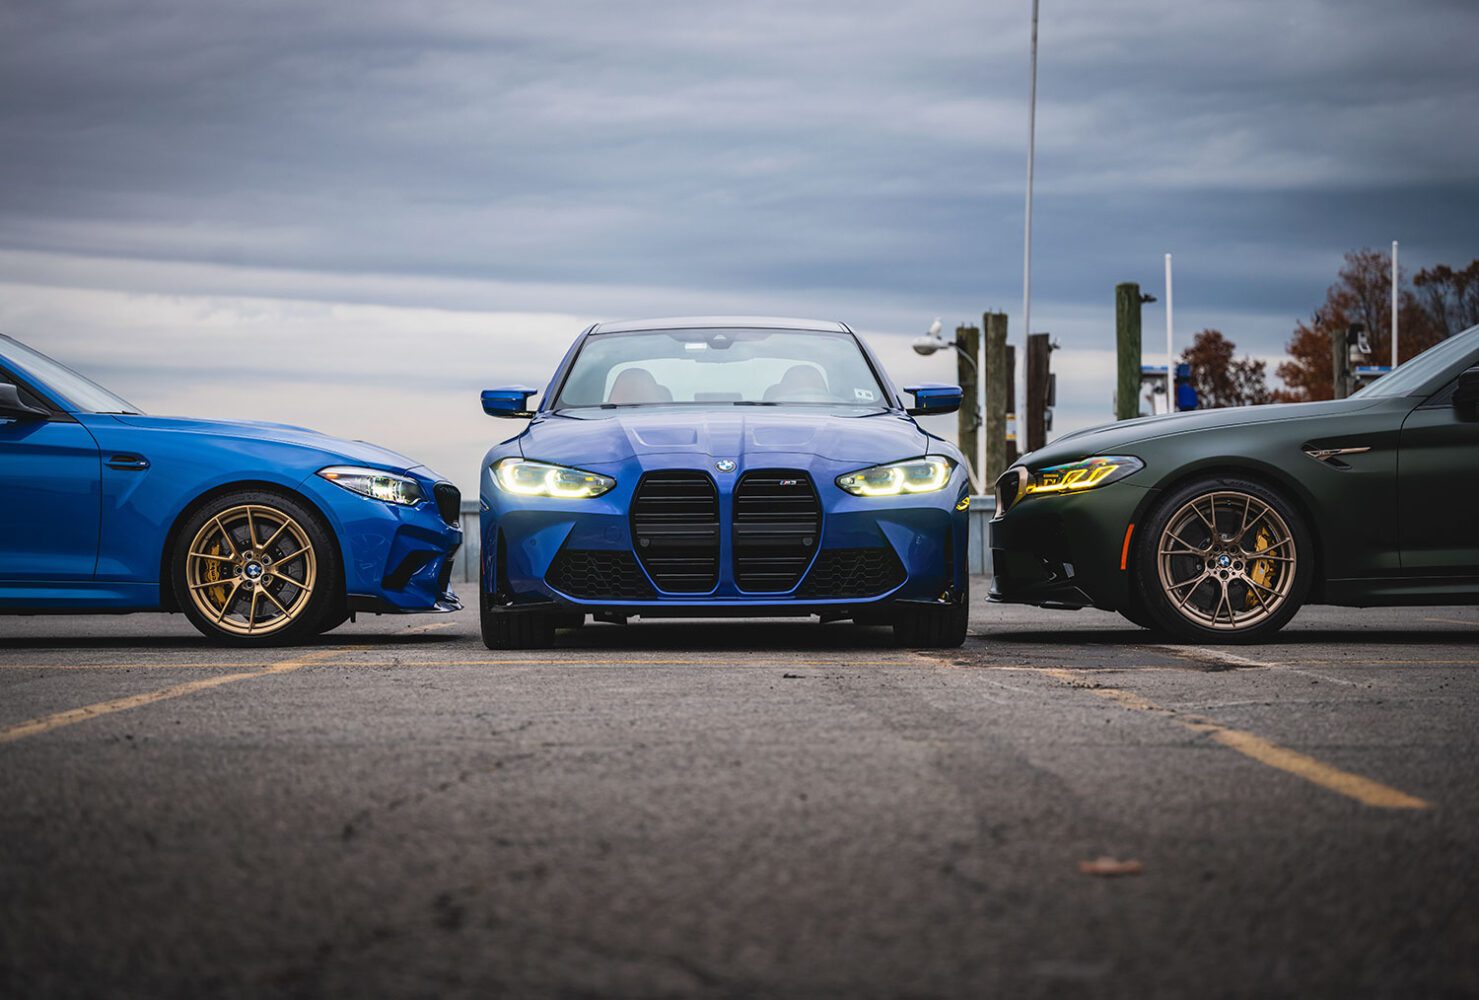 BMW M2, M3, and M5